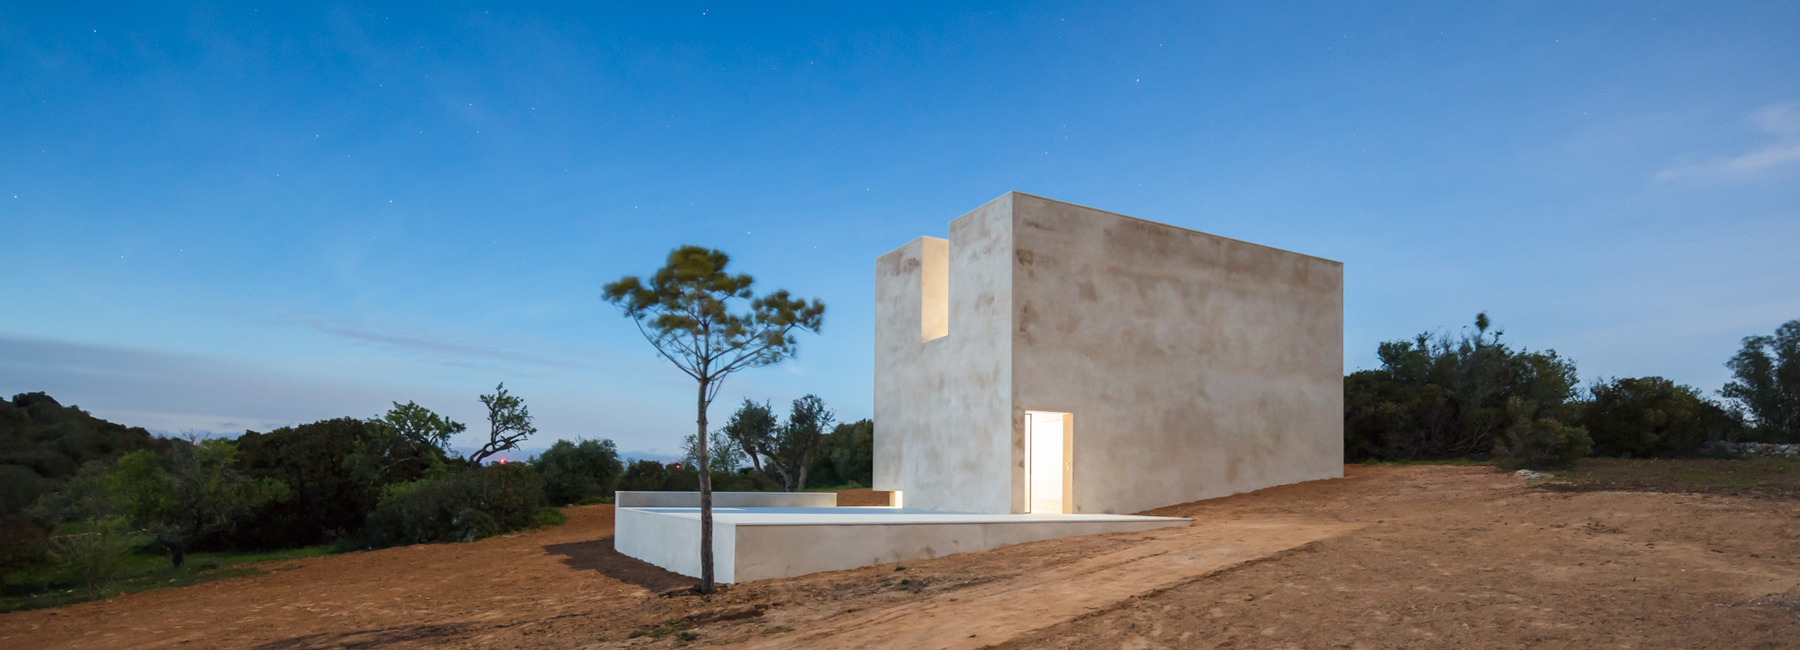 Ã¡lvaro siza vieira builds hillside chapel in portugal without electricity, heat or running water